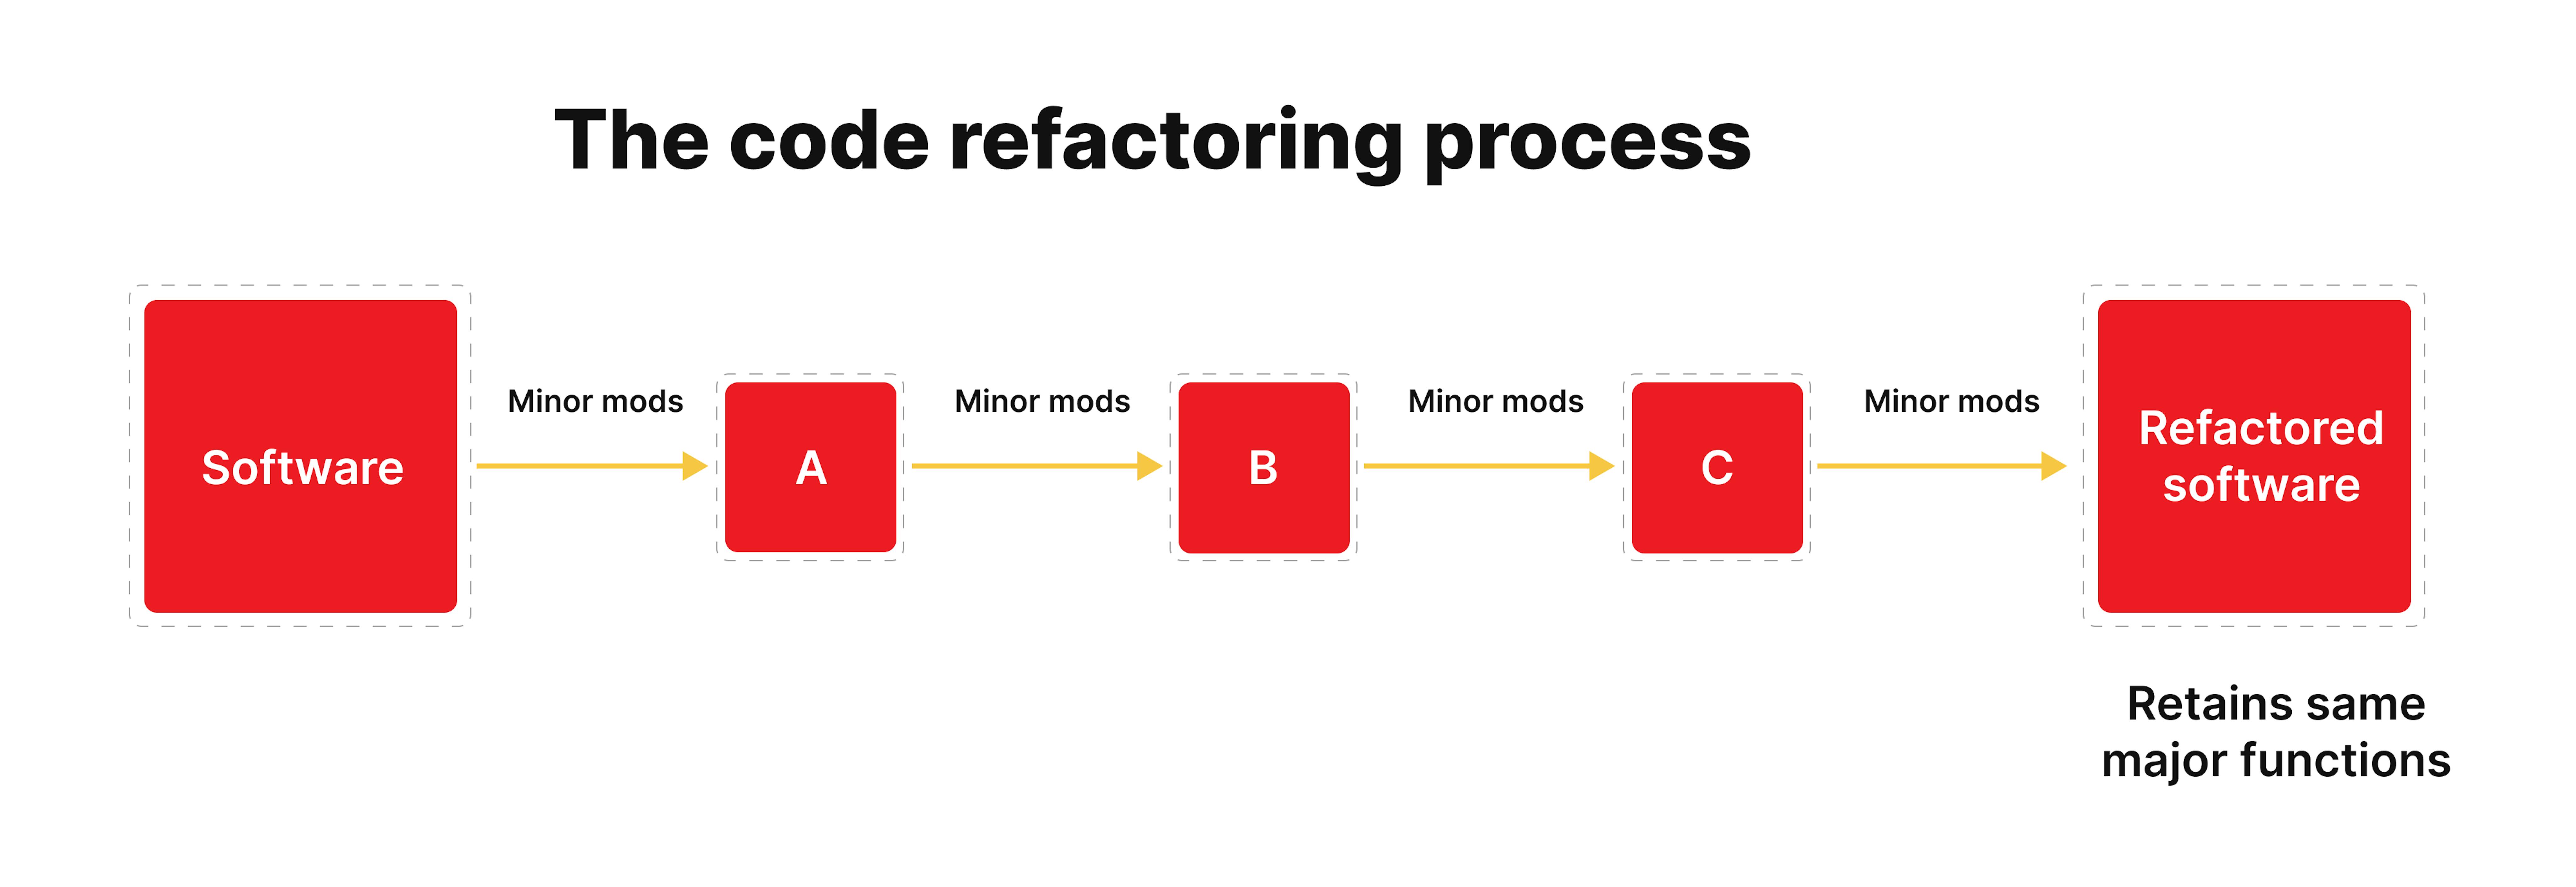 The code refactoring process.